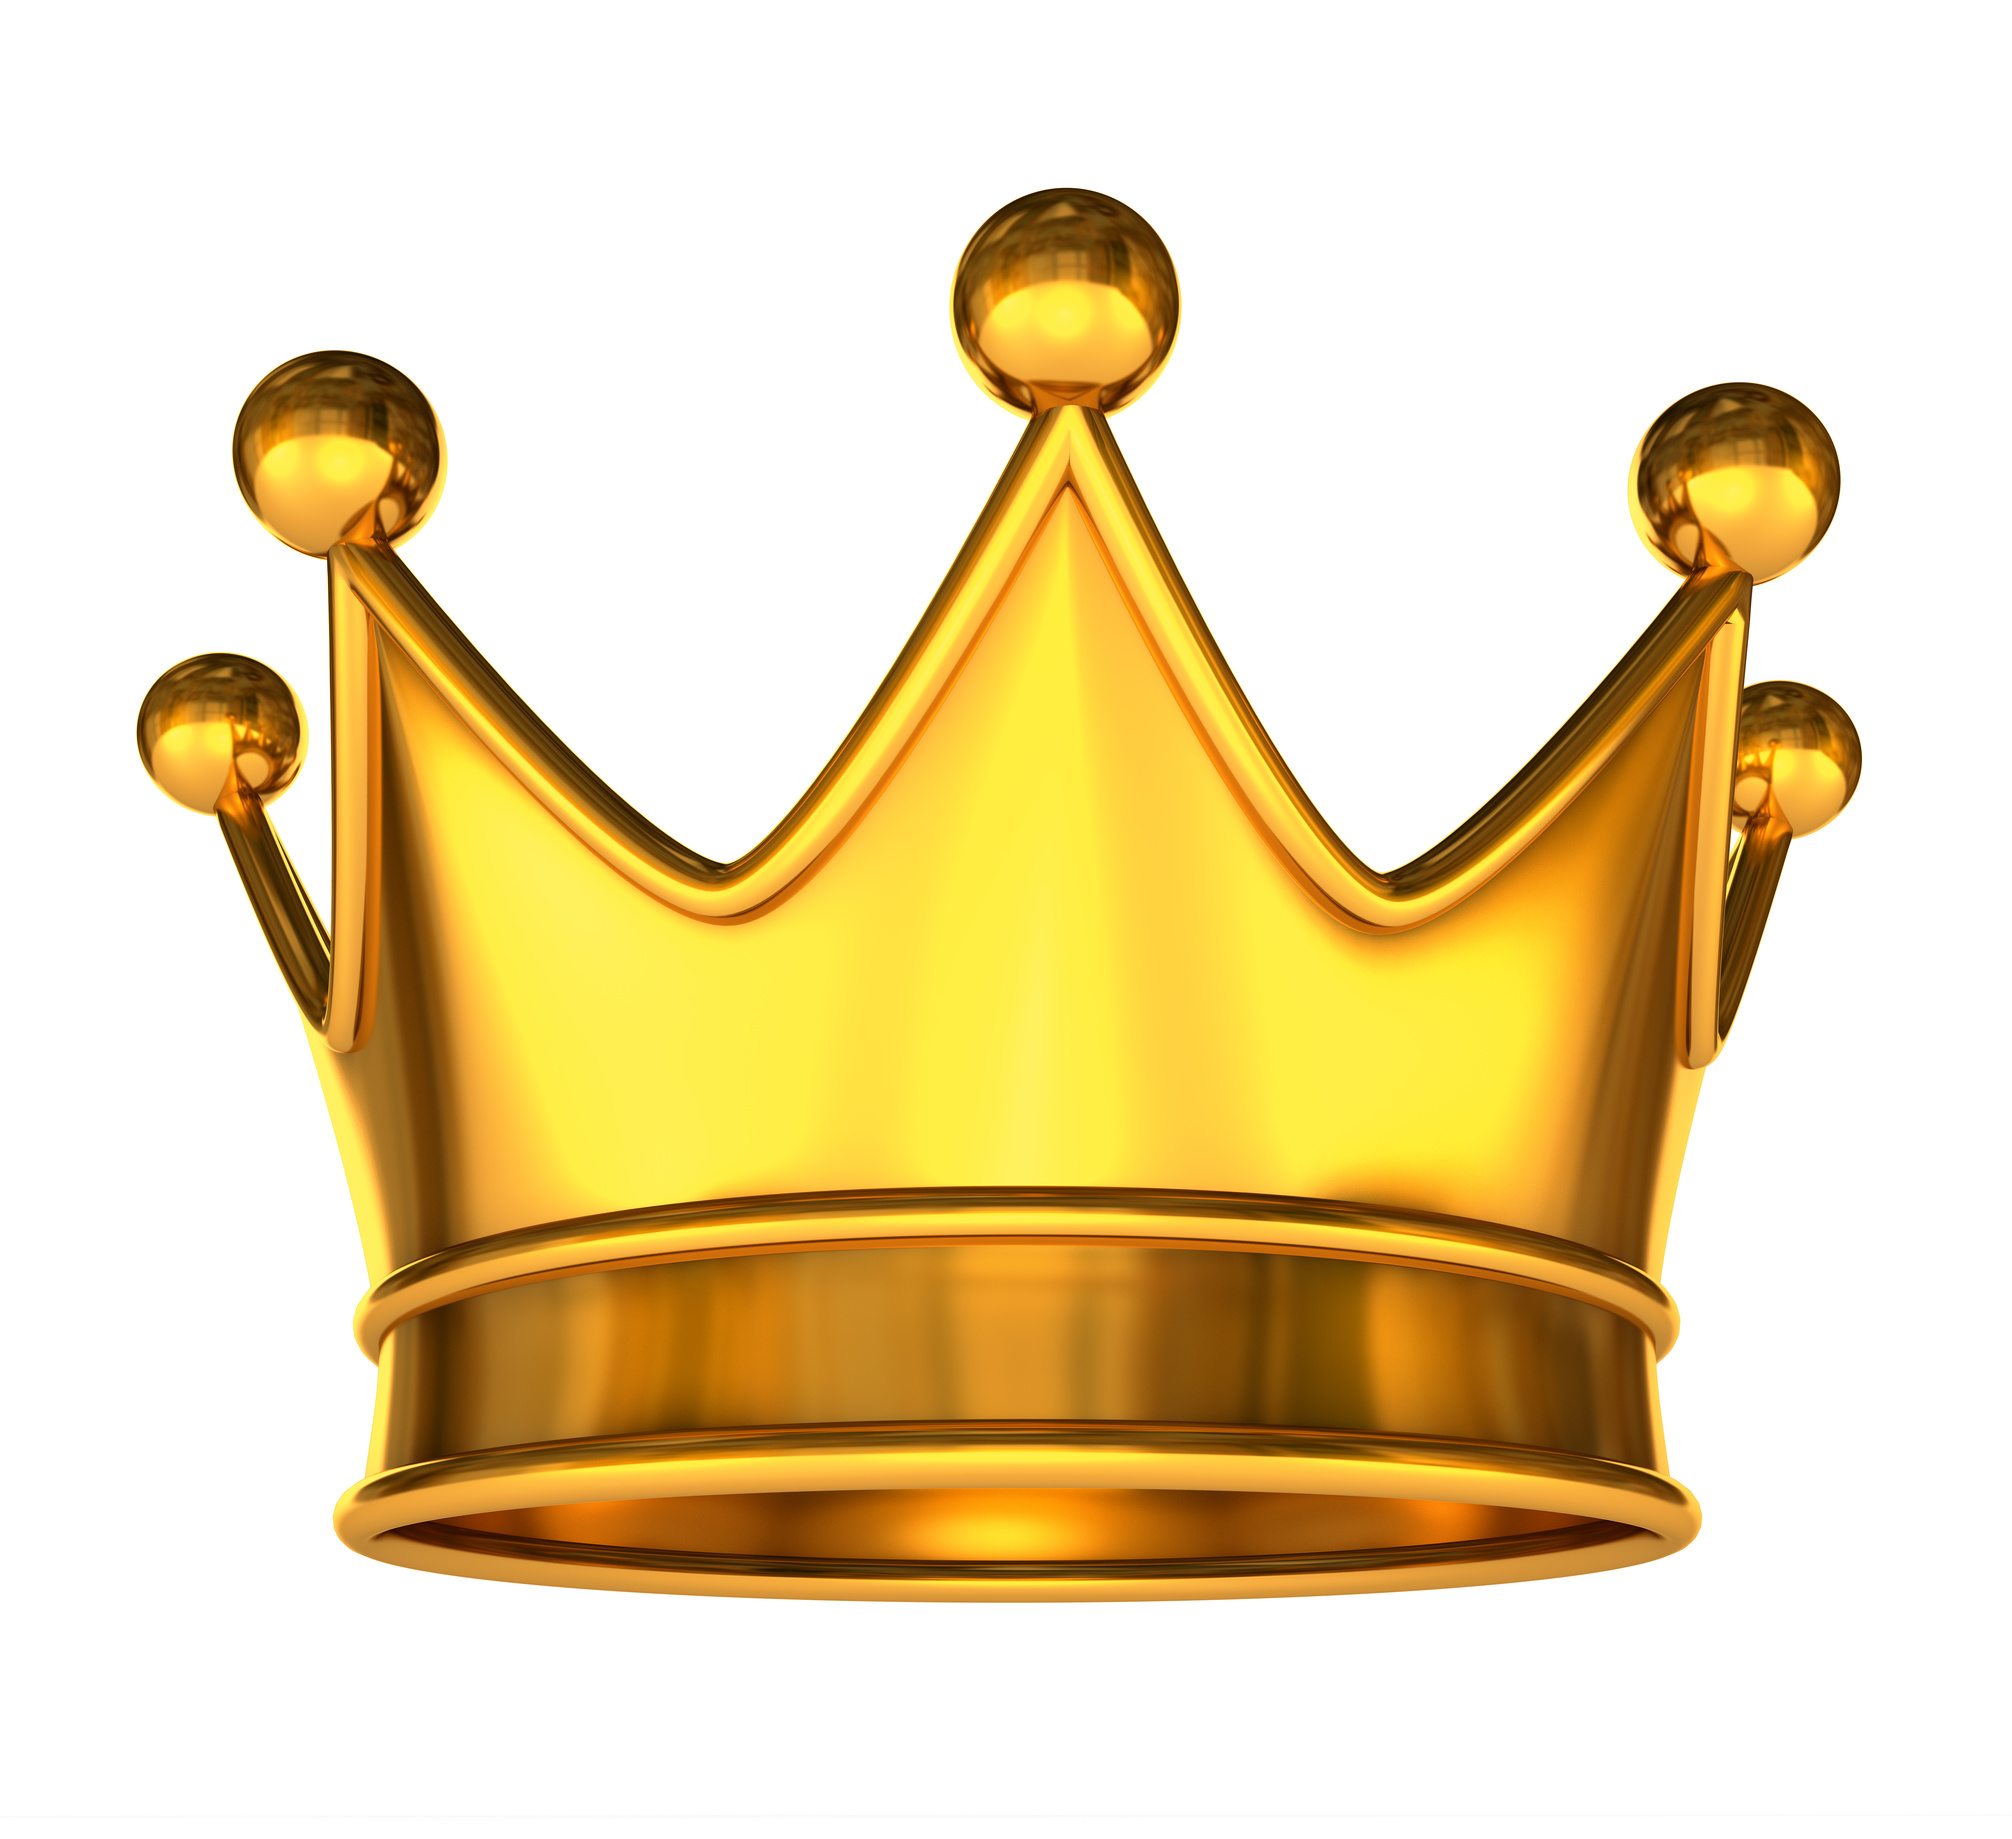 gold crown king clipart - Clipground